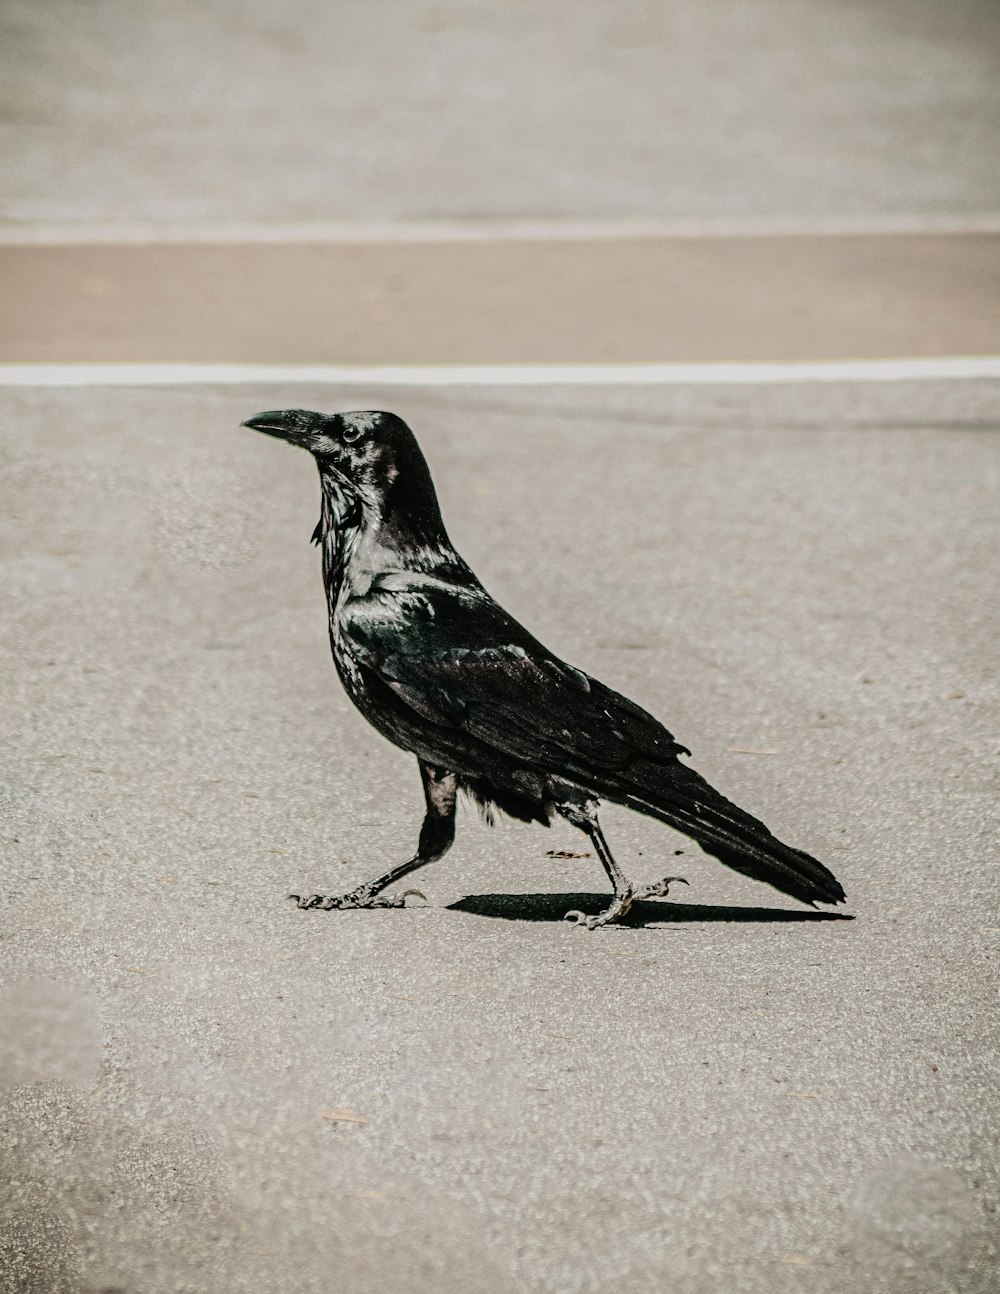 black and white bird on gray concrete floor during daytime